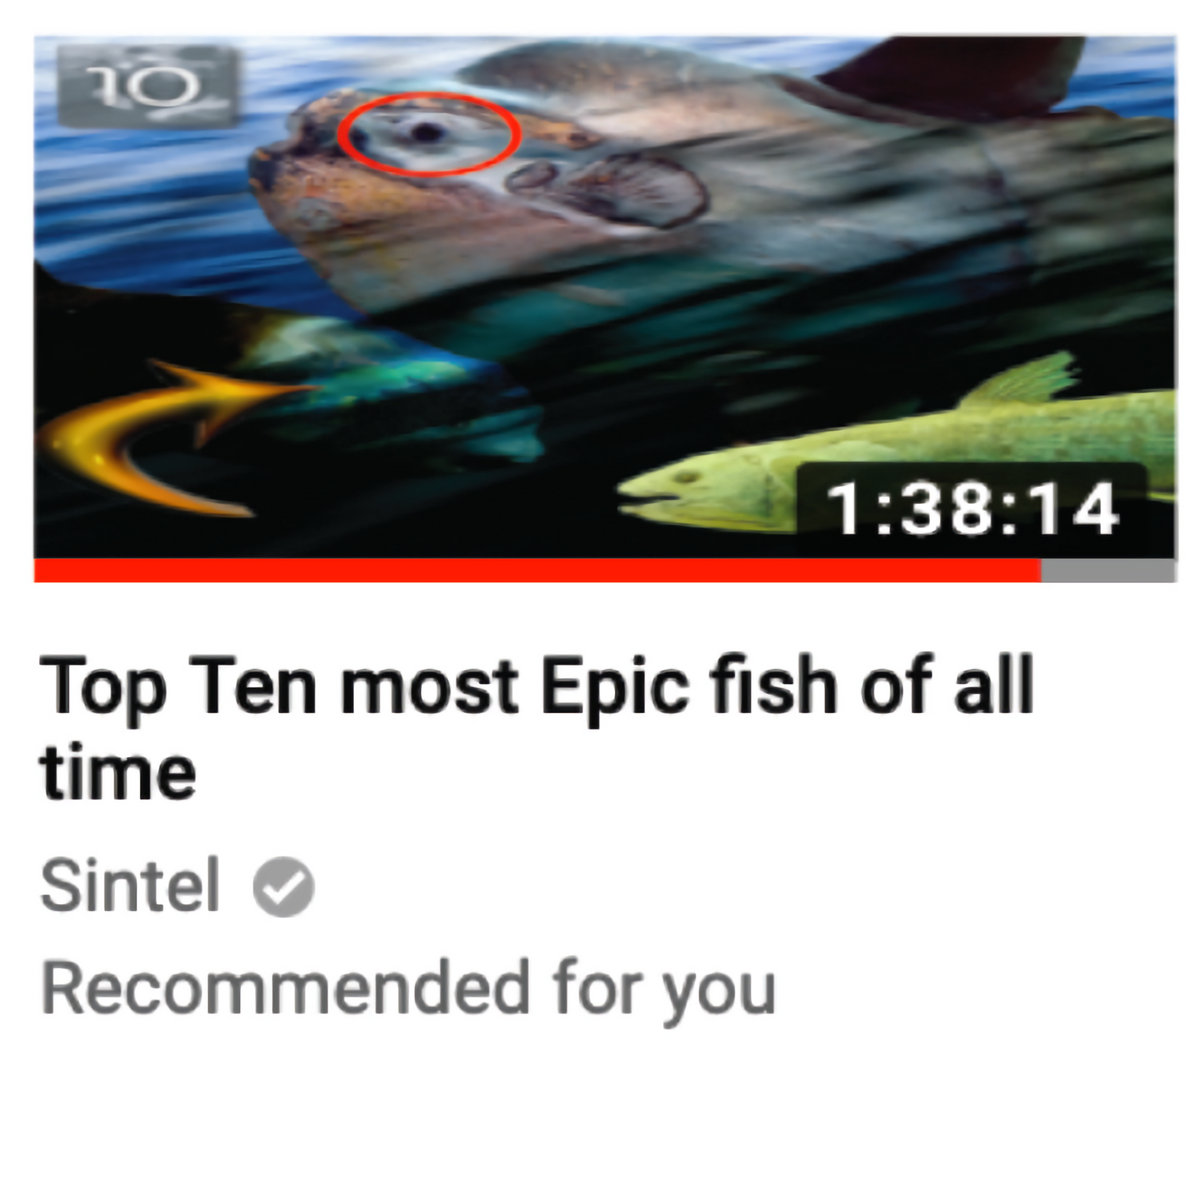 The album cover for "Top Ten most Epic fish of all time" by Sintel. It's a parody of a YouTube thumbnail with the album name/artist as the title/user, and the thumbnail itself being a sunfish with its eye circled in red. The video's length is 1 hour, 38 minutes, 14 seconds.